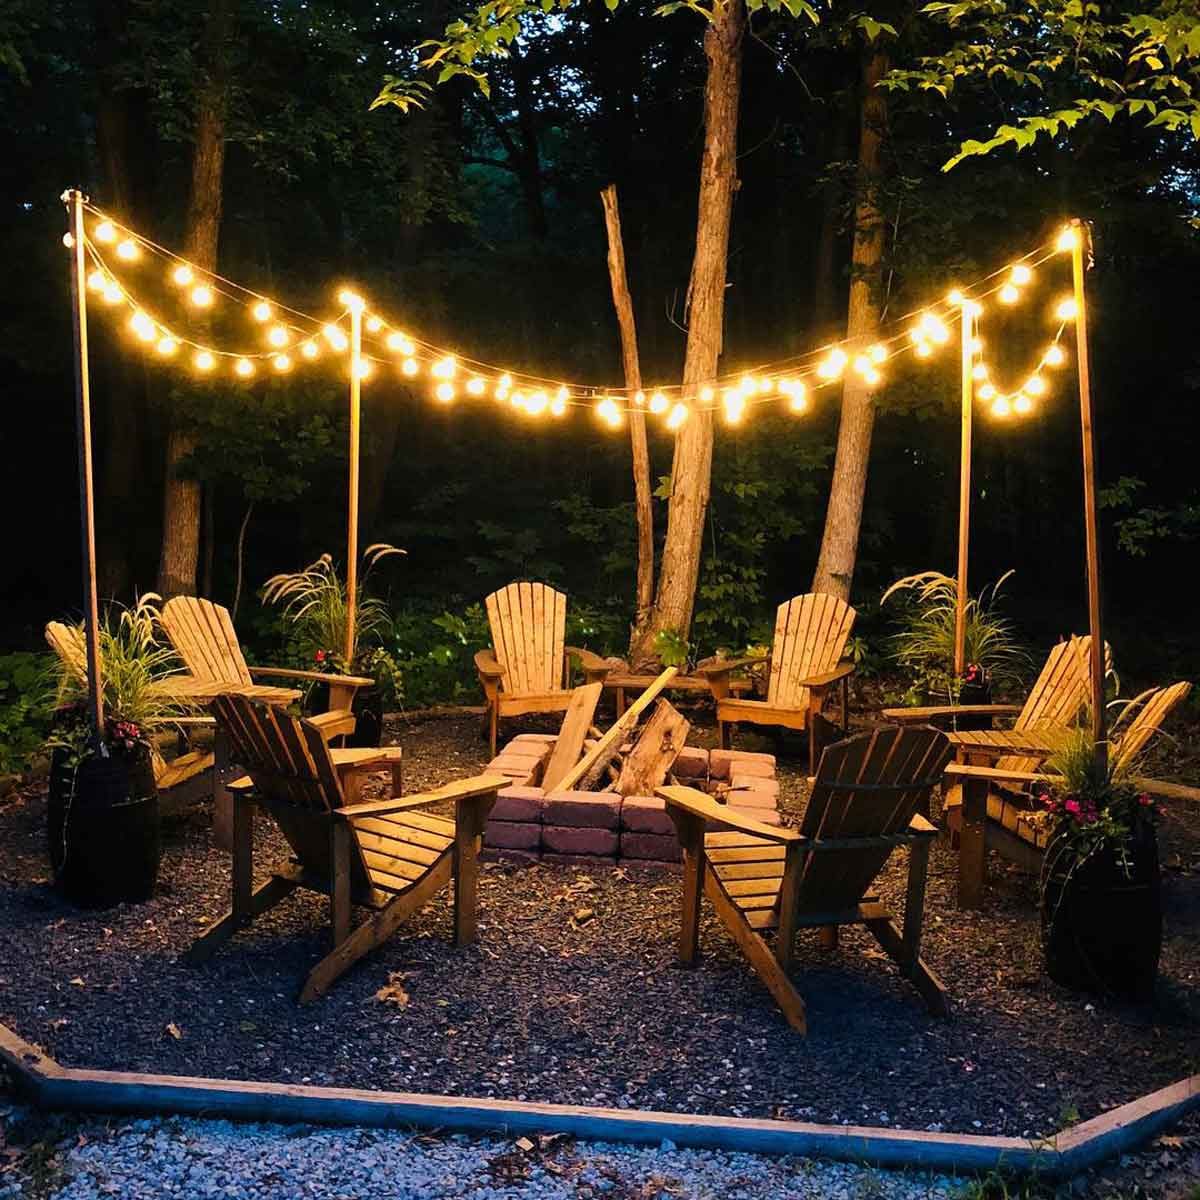 12 Outdoor Fire Pit Lighting Ideas | The Family Handyman